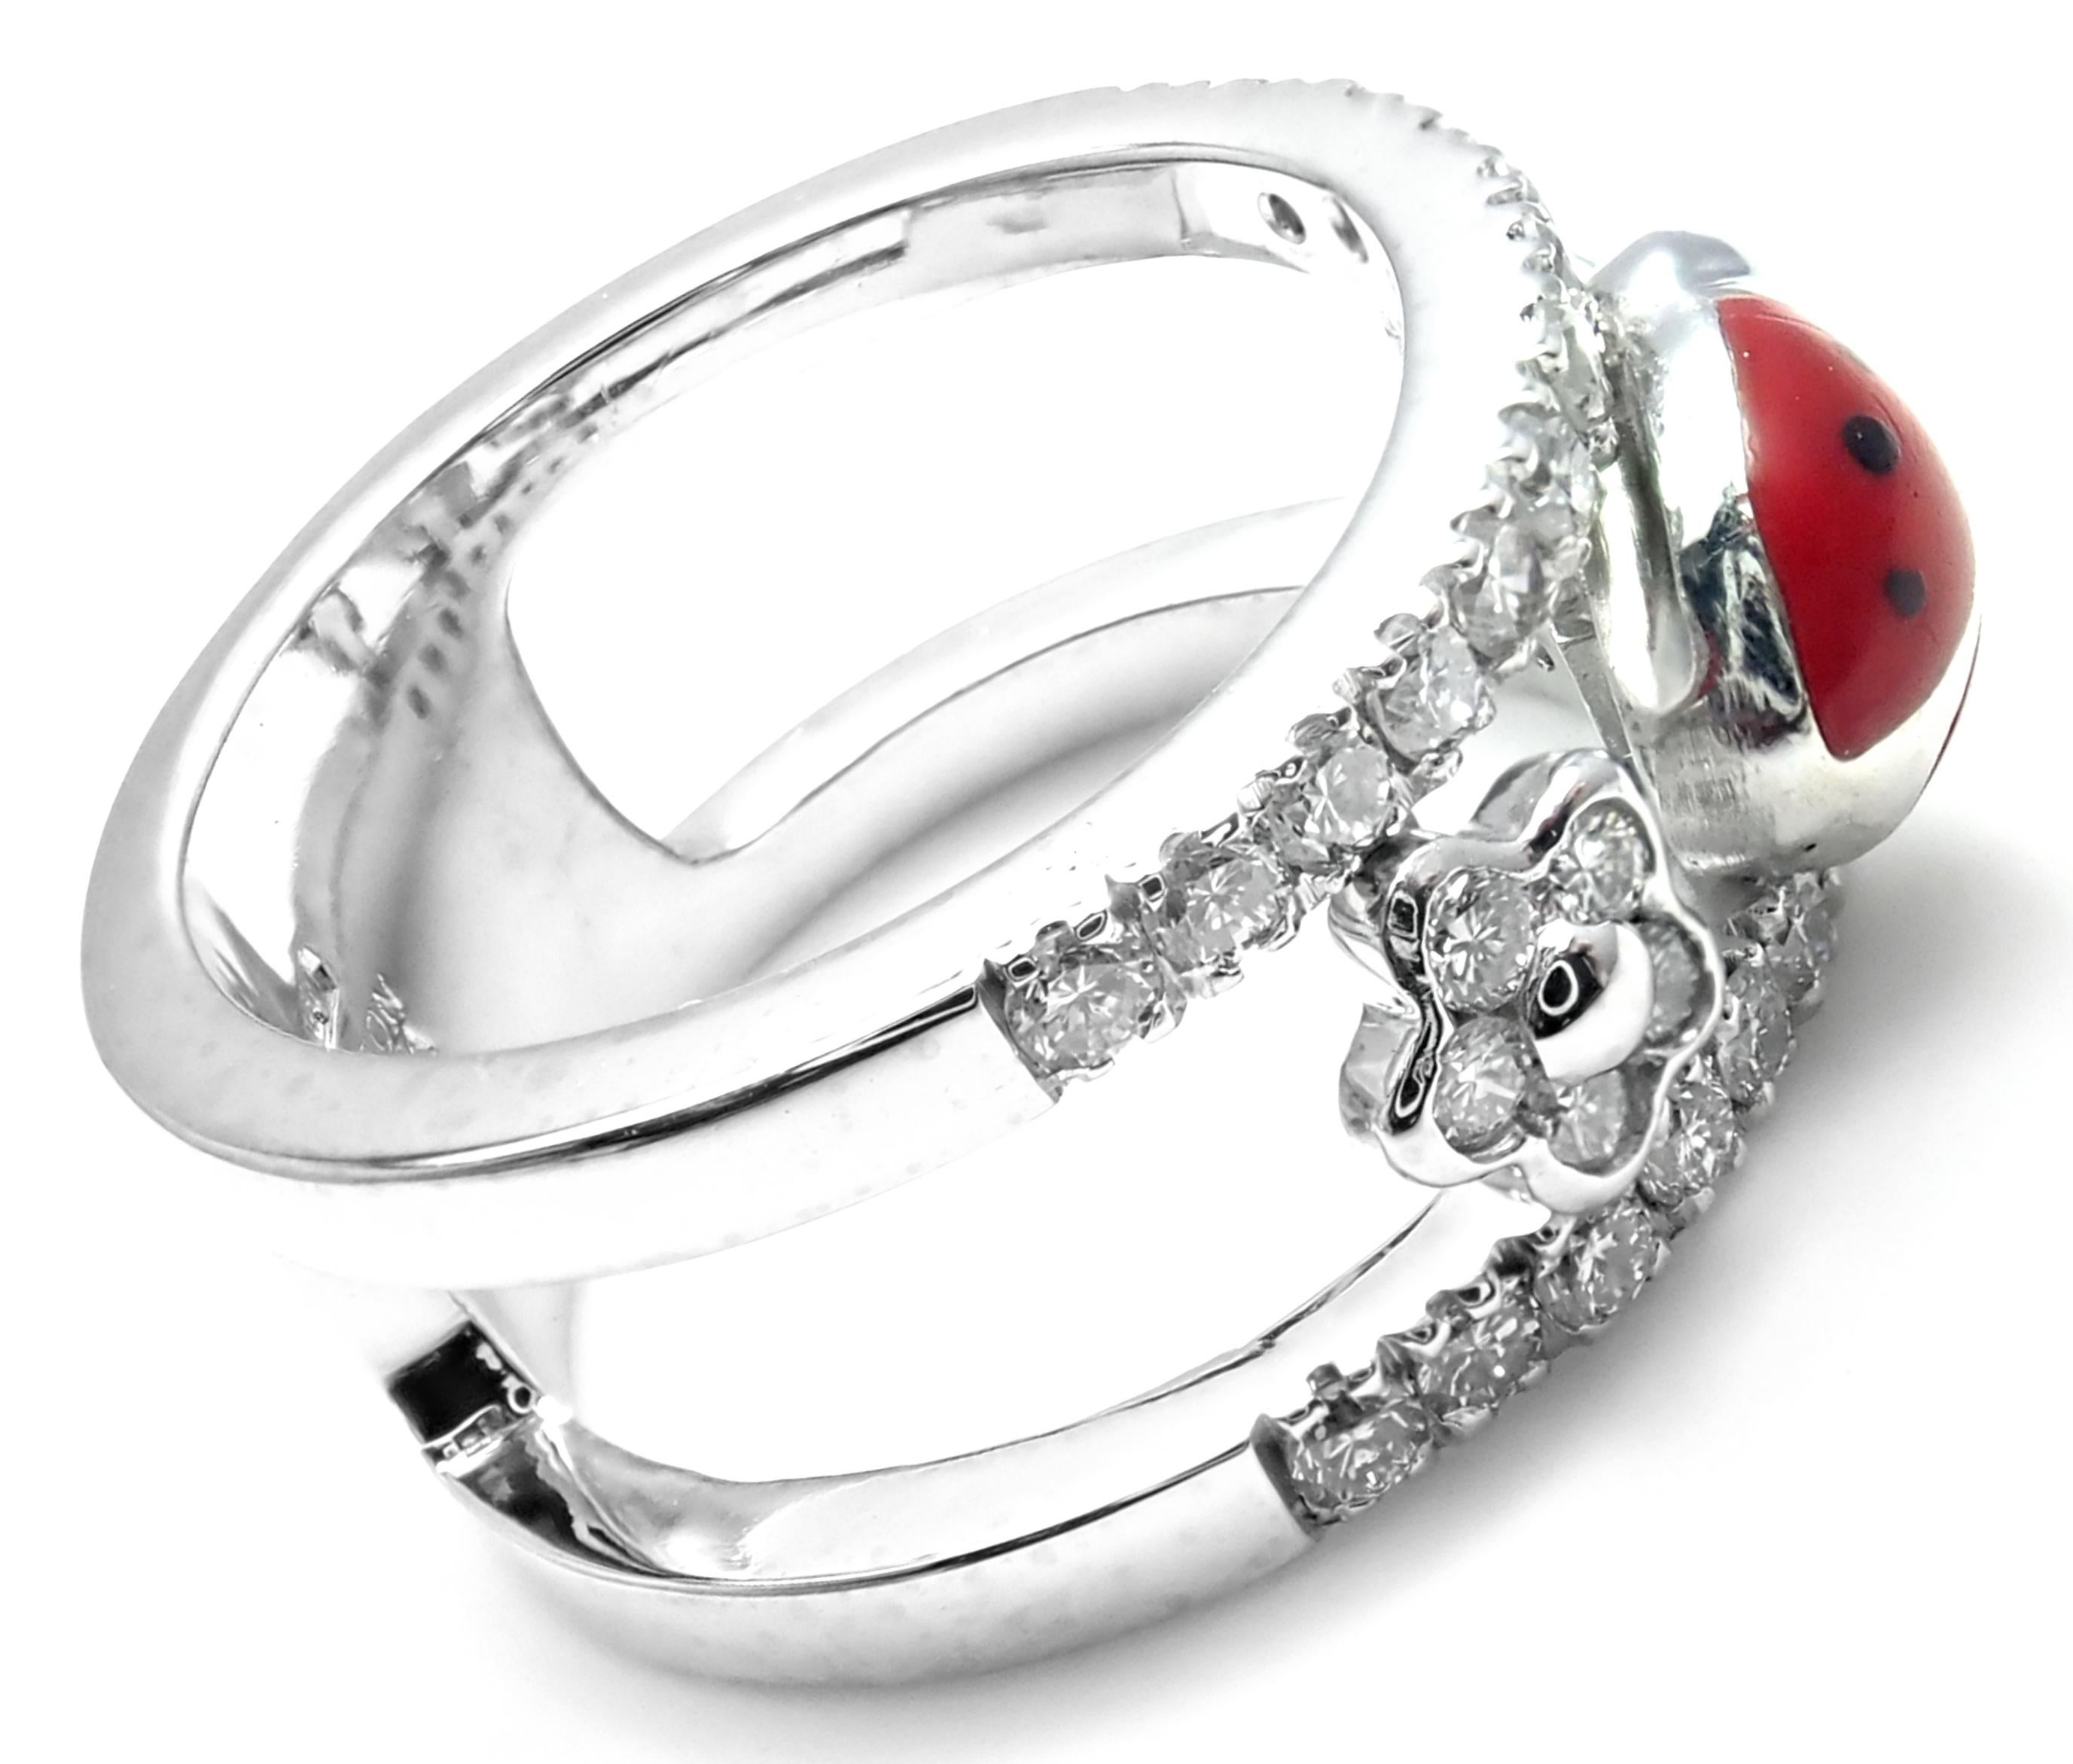 18k White Gold Diamond Red Enamel Ladybug Band Ring by Aaron Basha. 
With Round brilliant cut diamonds VS1 clarity, G color total weight approx. .78ct
Details: 
Size:  4
Weight: 7.5 grams
Width: 8mm
Stamped Hallmarks: Aaron Basha 750
*Free Shipping